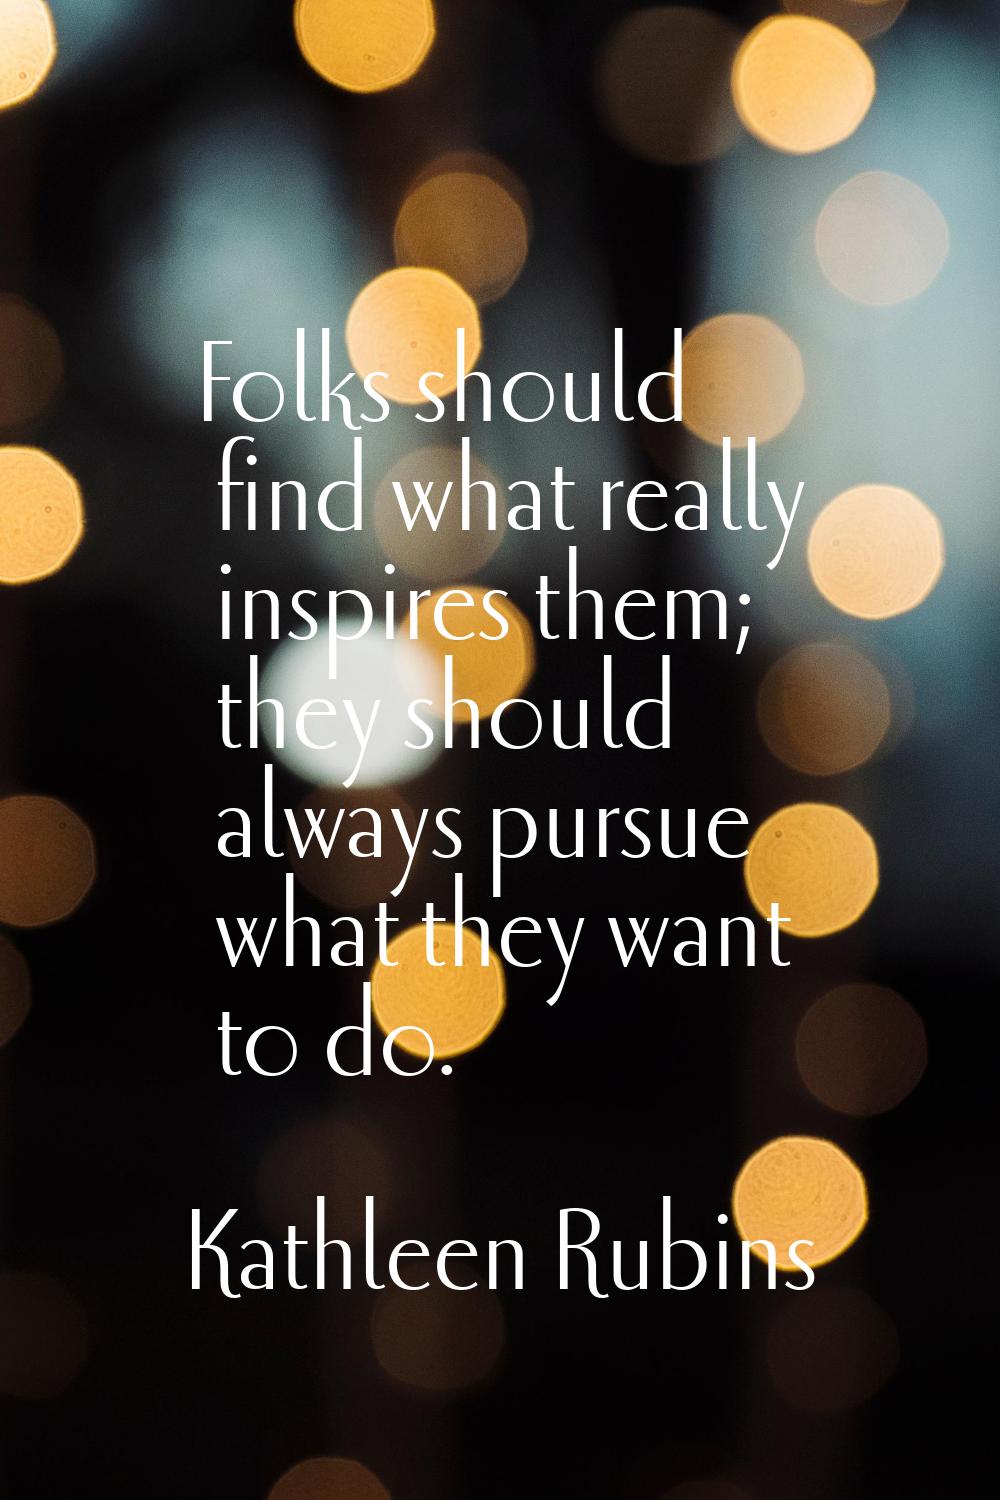 Folks should find what really inspires them; they should always pursue what they want to do.